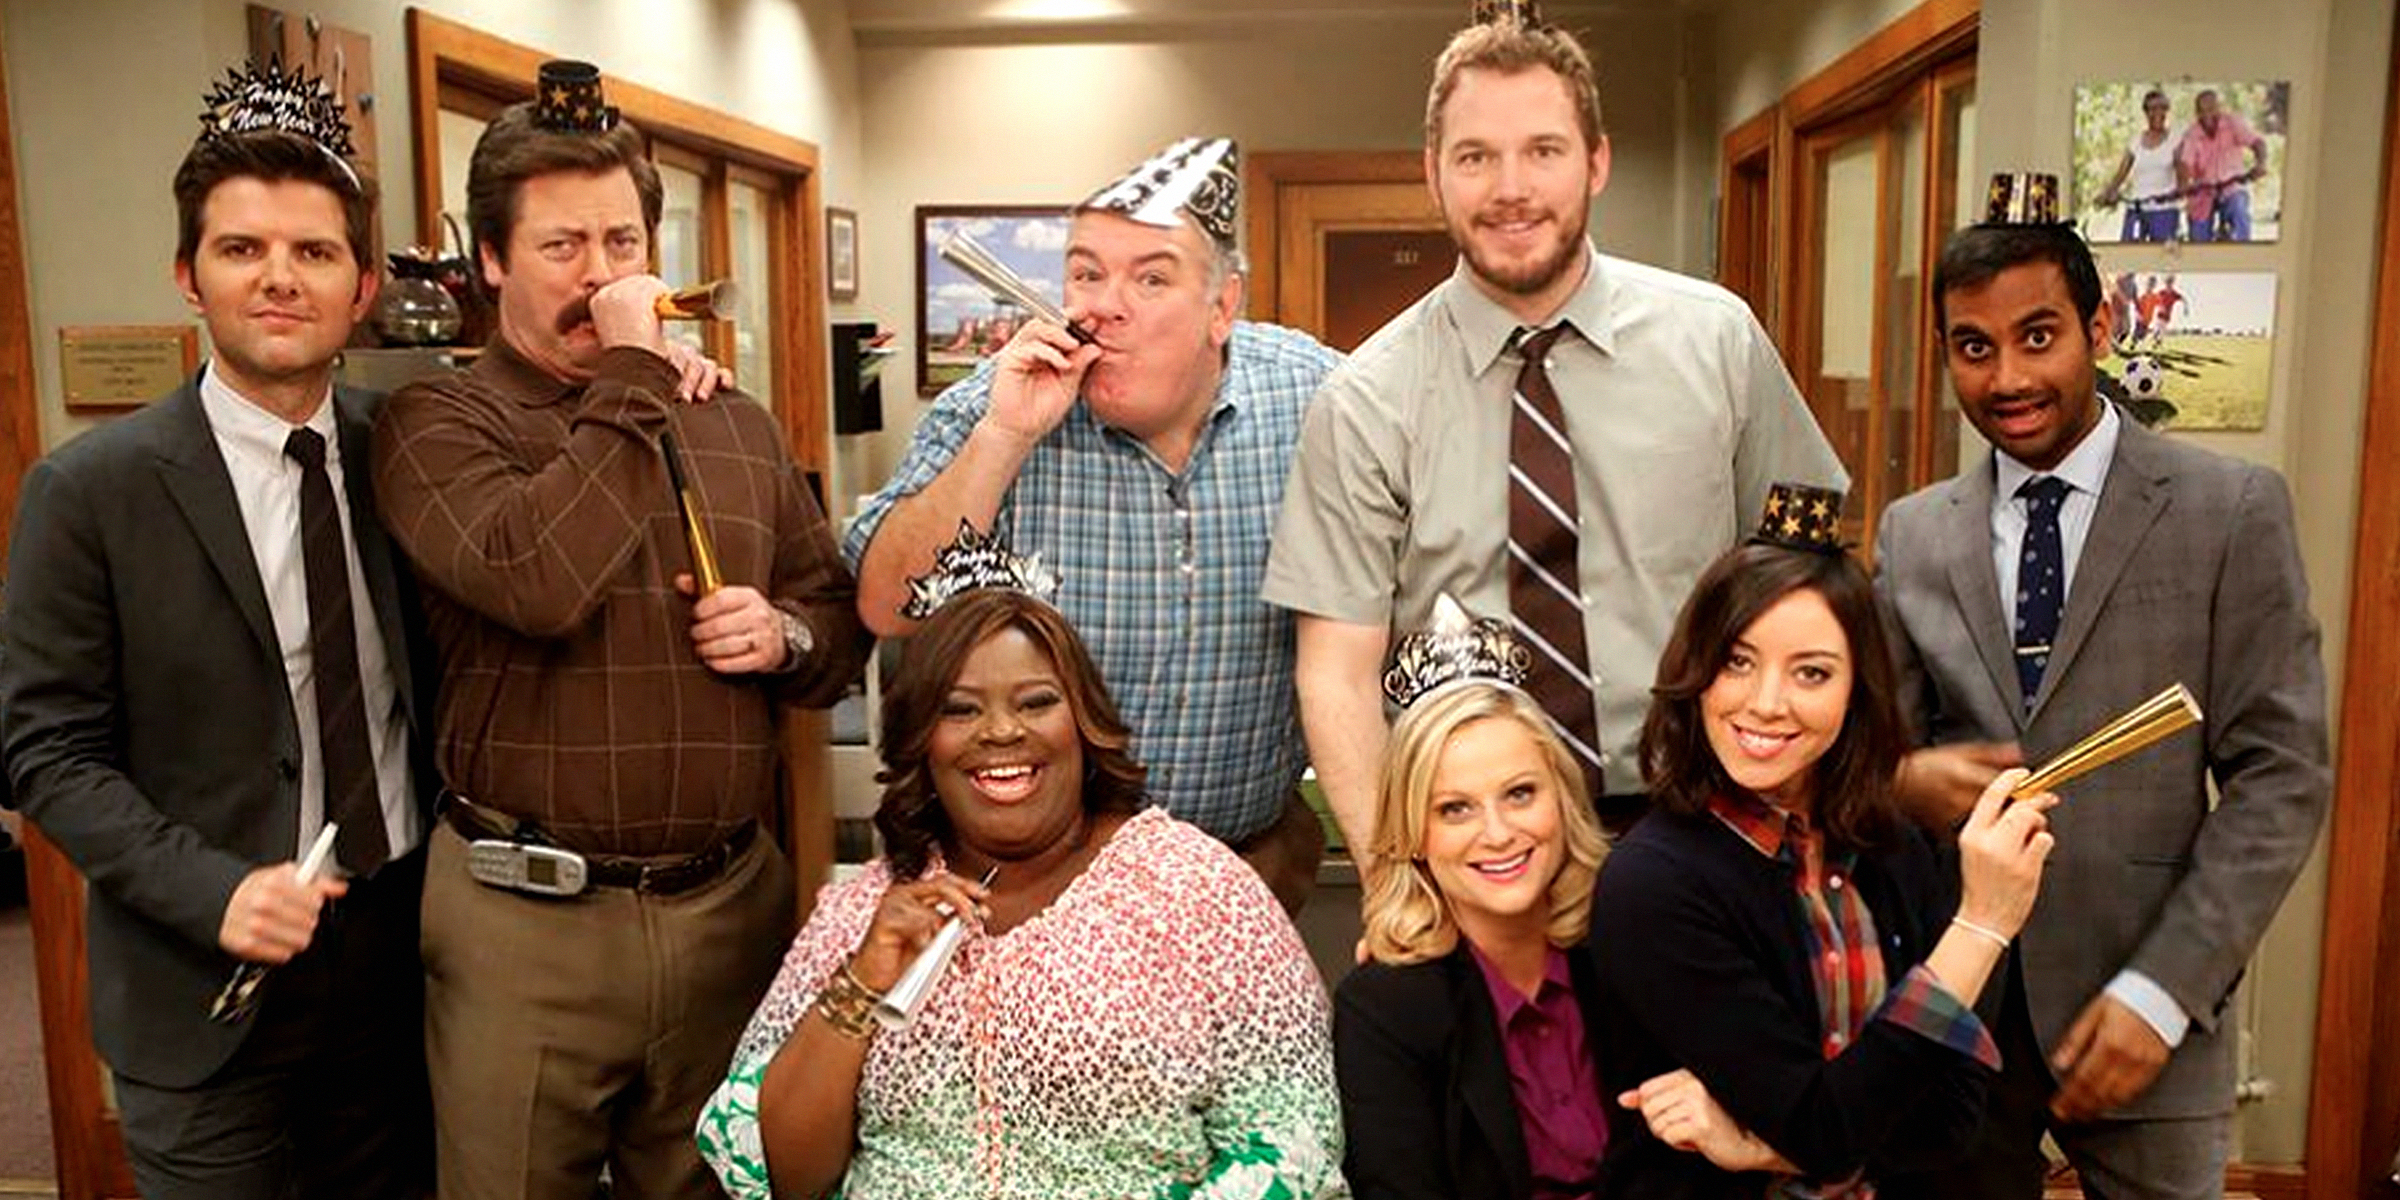 The cast of the show "Parks and Recreation" | Source: Facebook/parksandrecreation